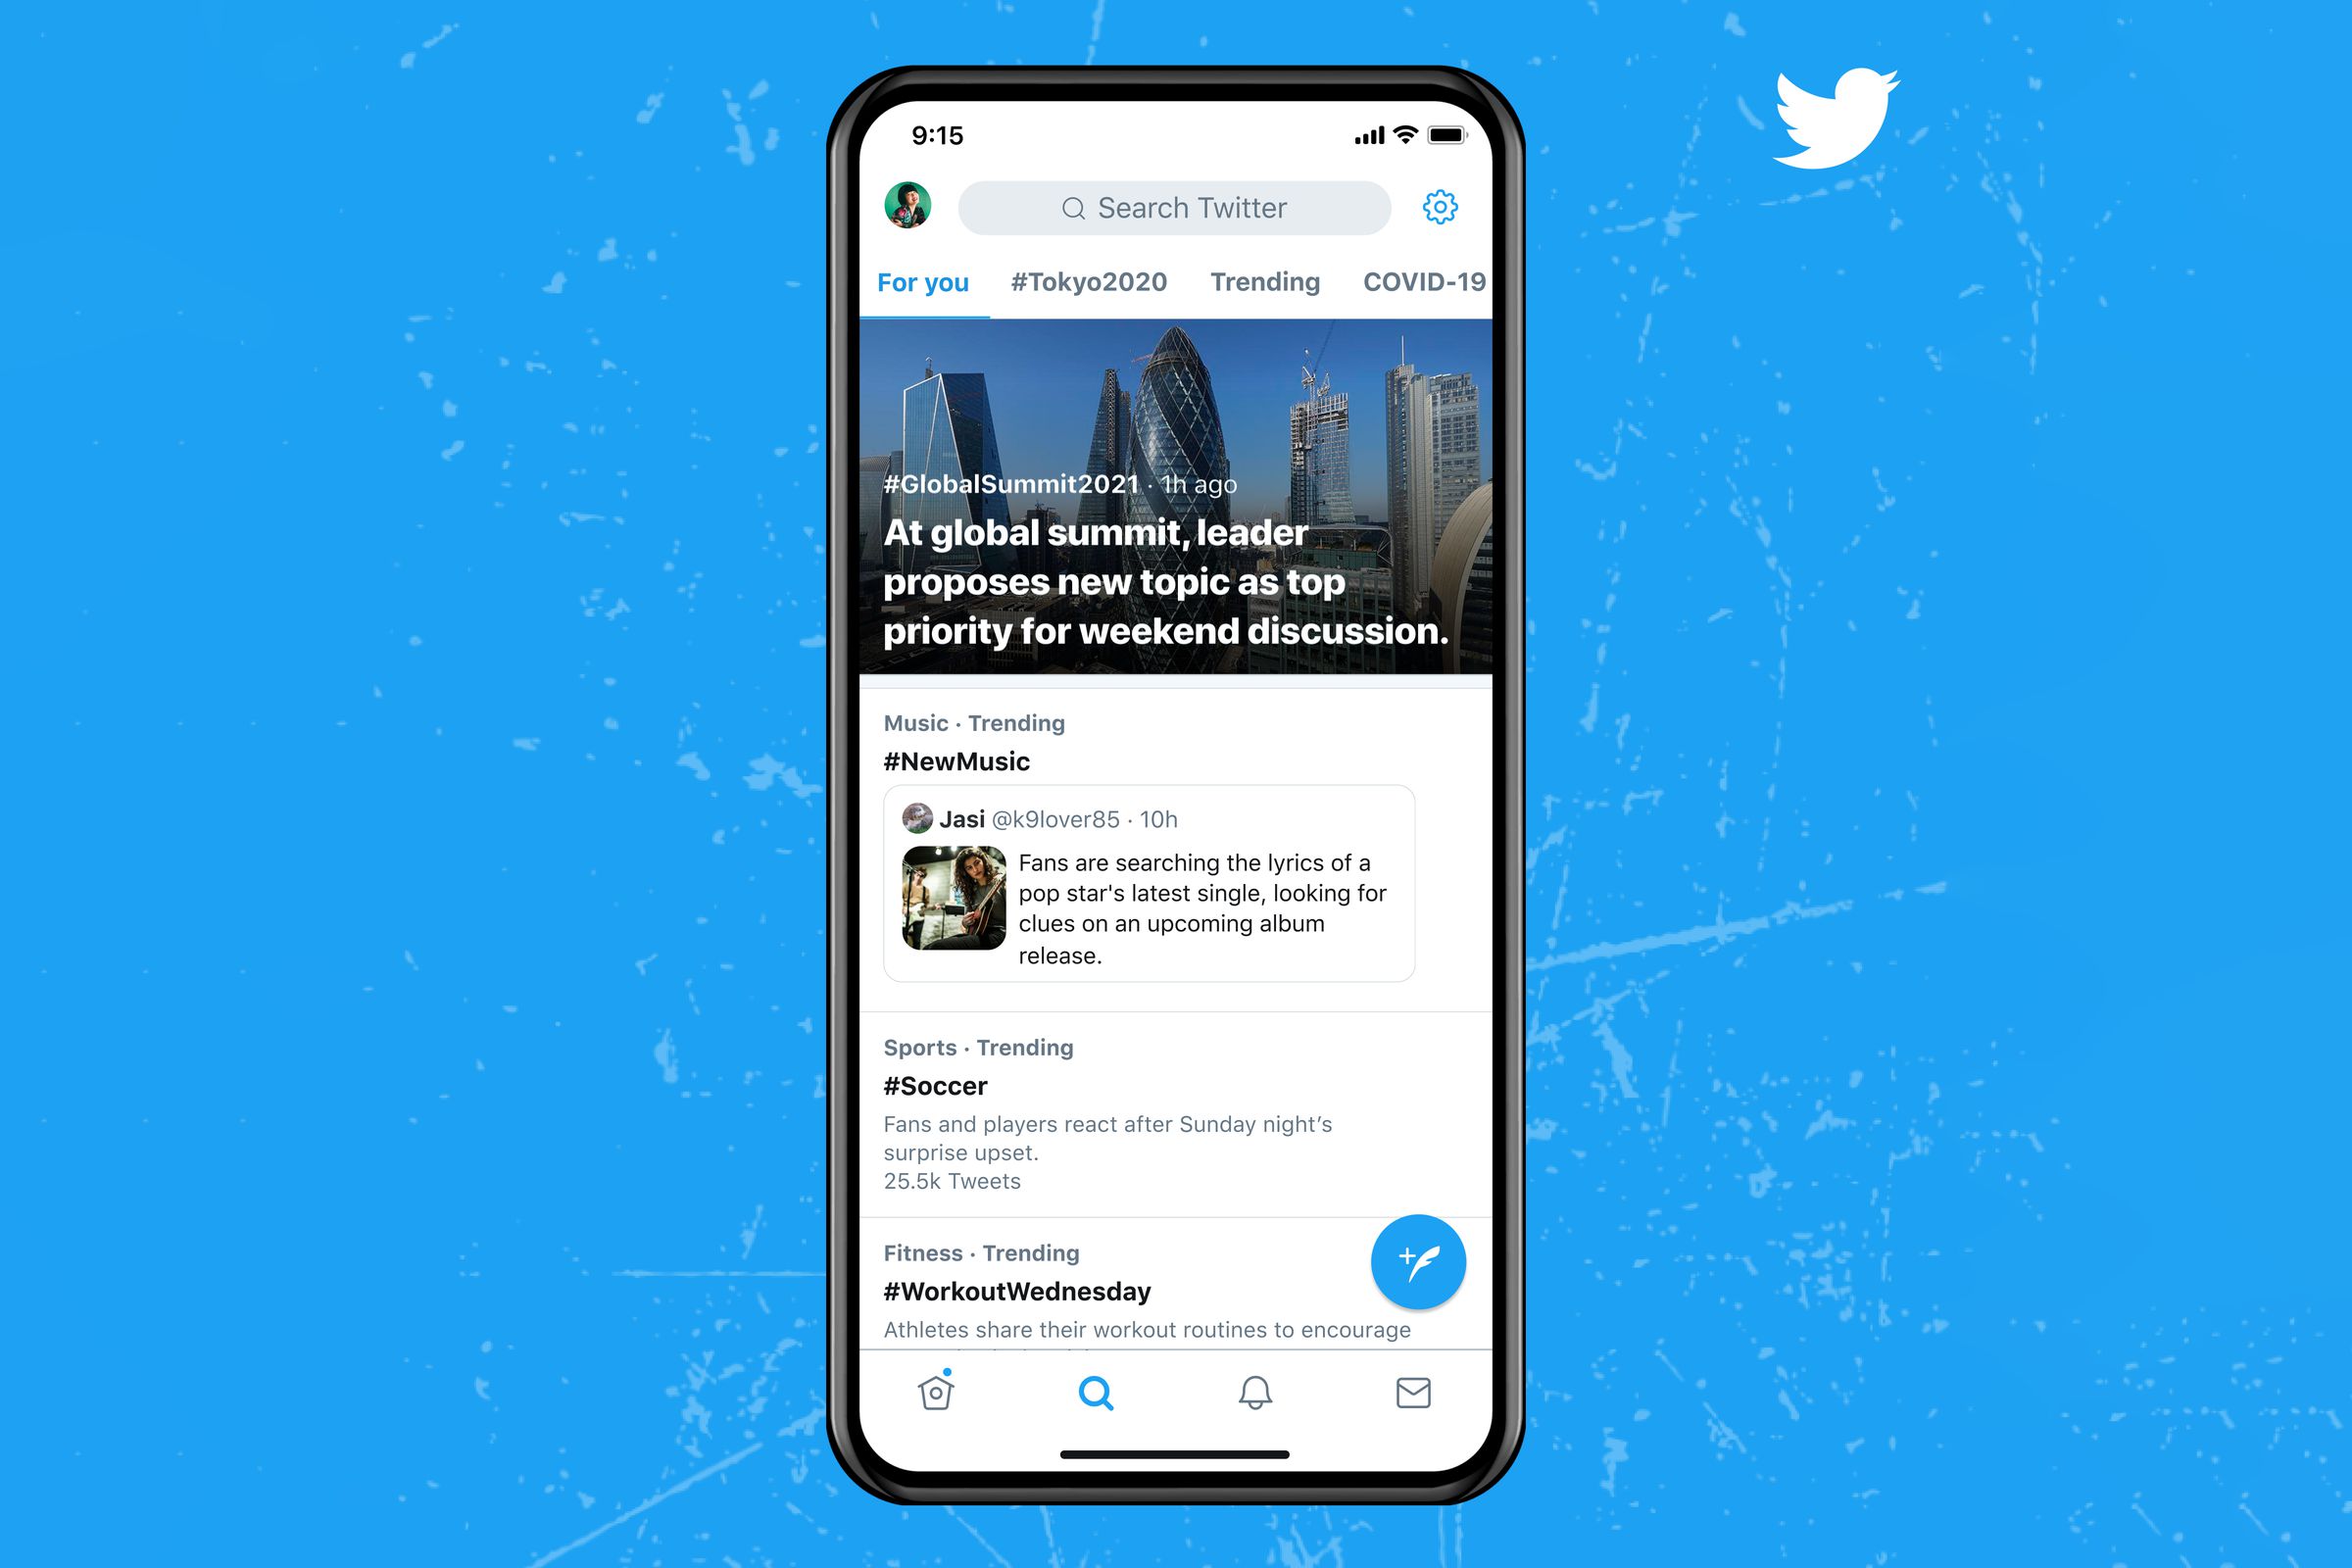 Twitter’s added context for content on its platform.